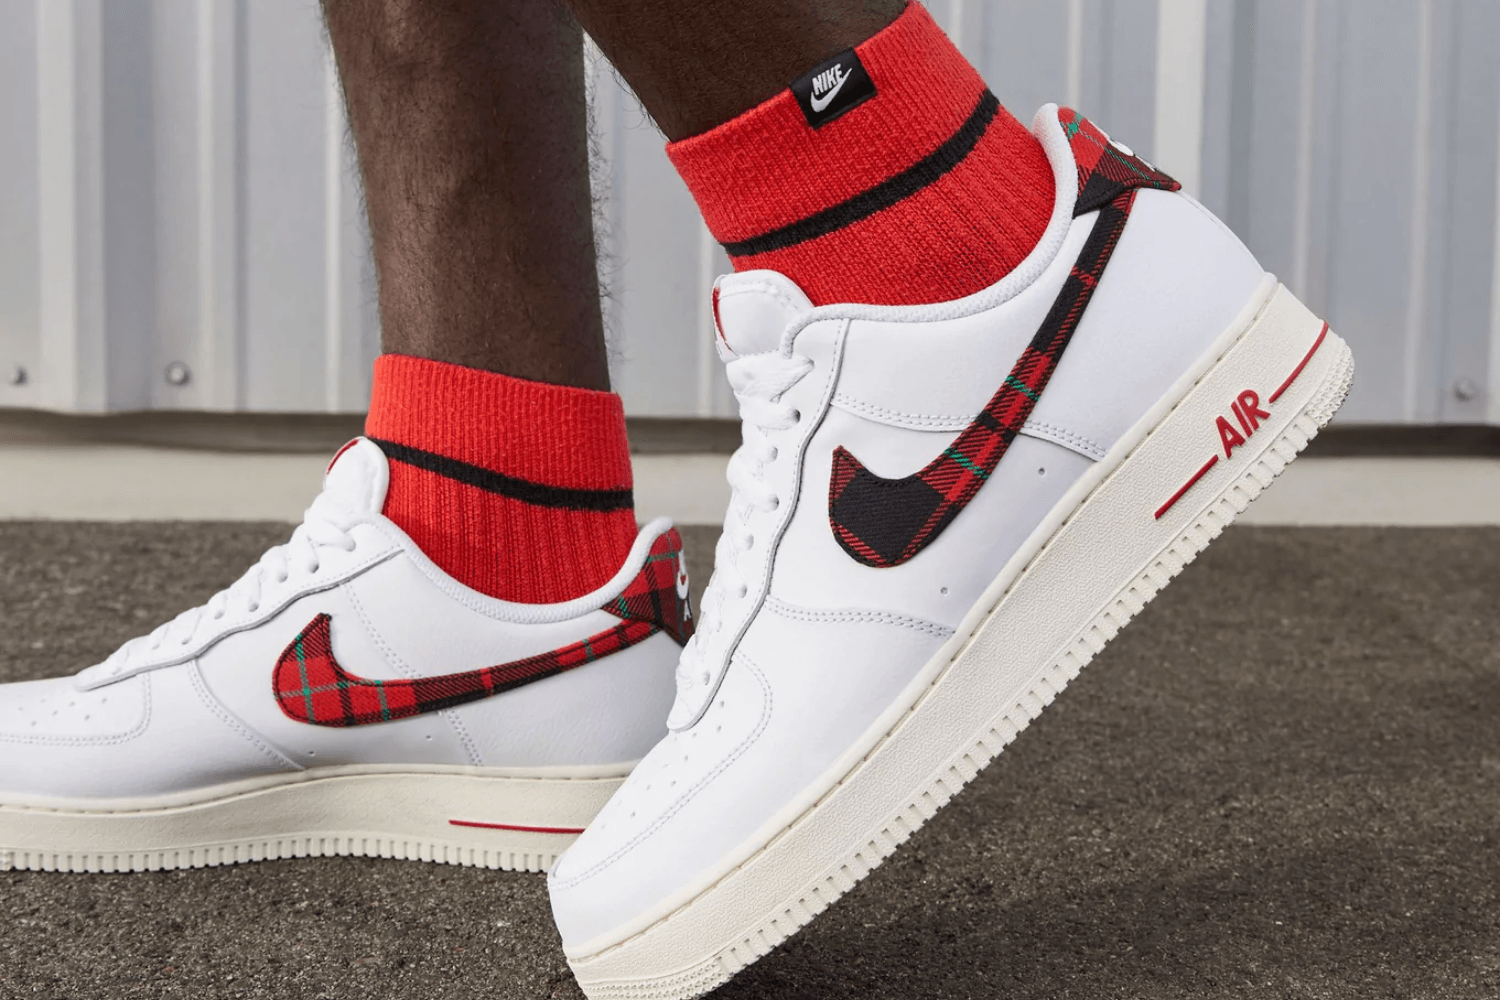 How to style the Nike Air Force 1 and Dunk 'Plaid' pack